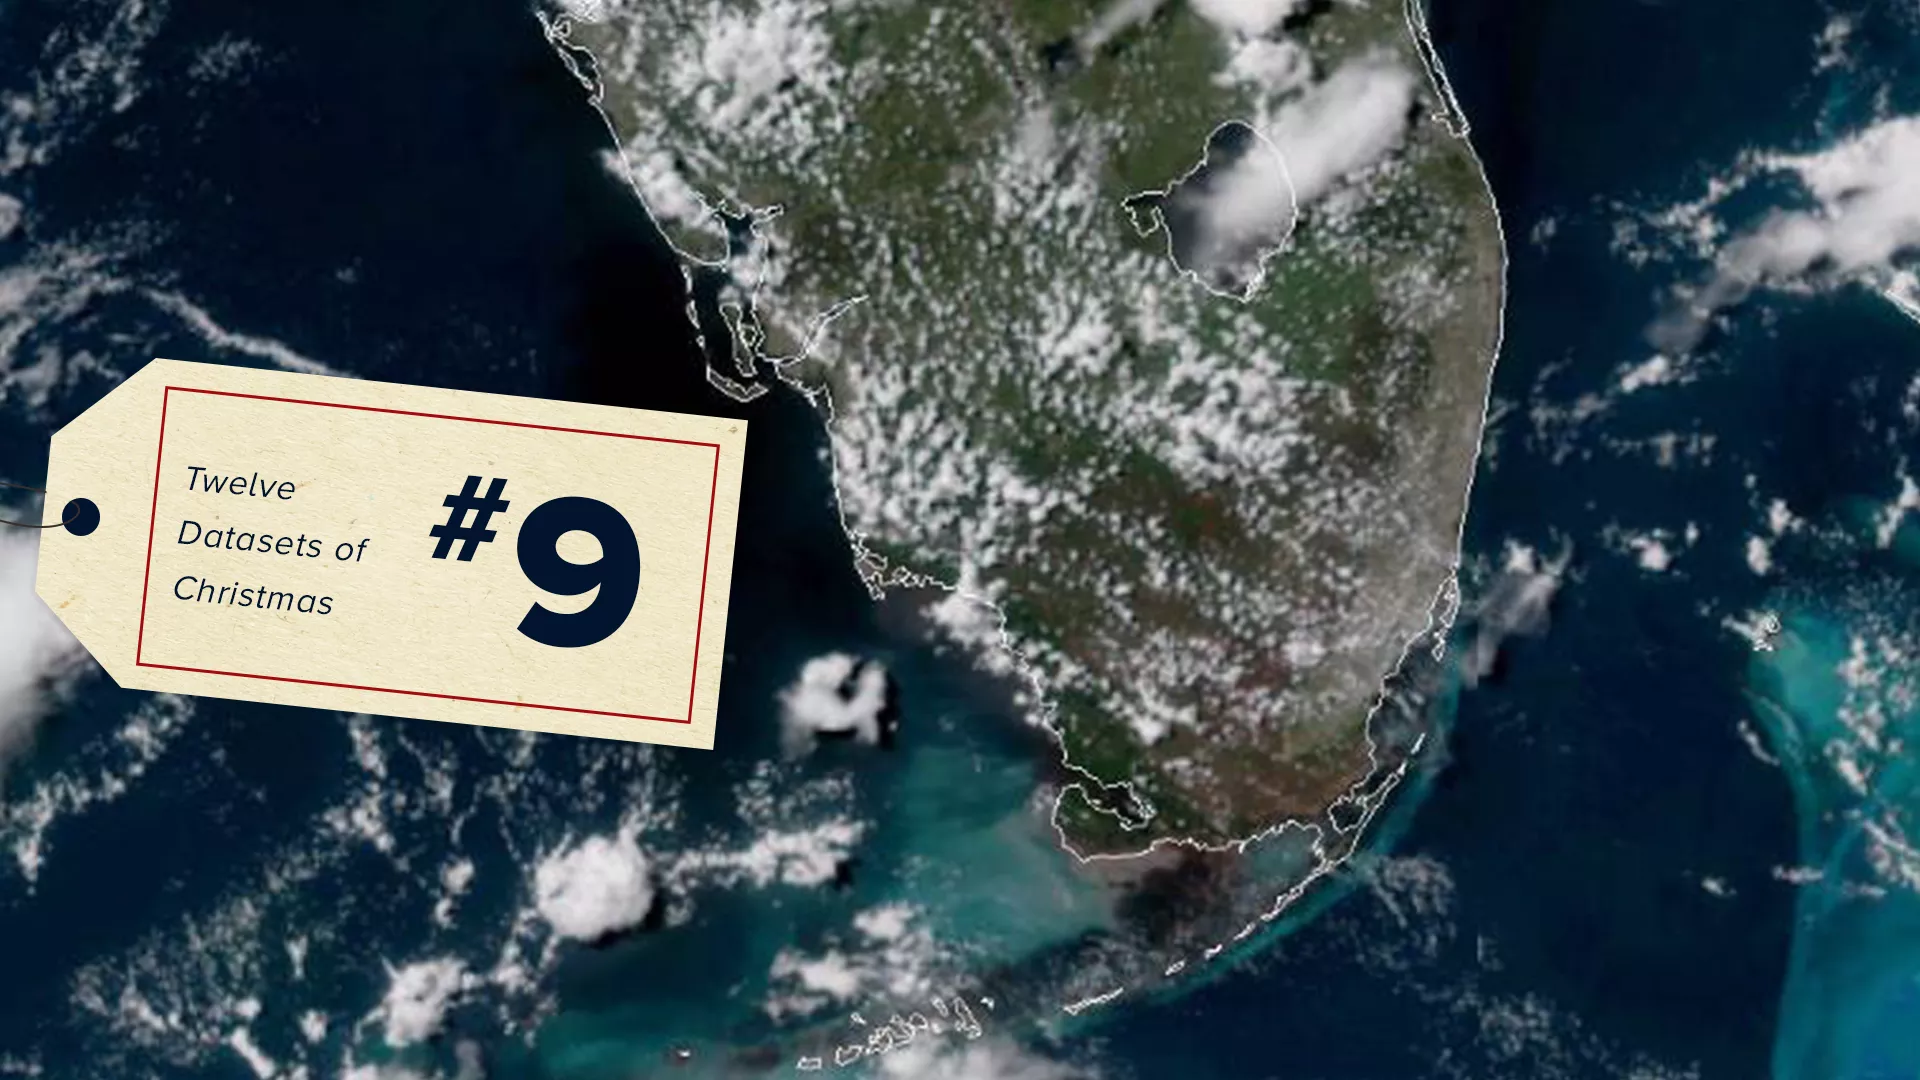 GeoColor imagery of the southern tip of Florida and algal blooms around its coast, with a #9 tag of the 12 Datasets of Christmas on top.